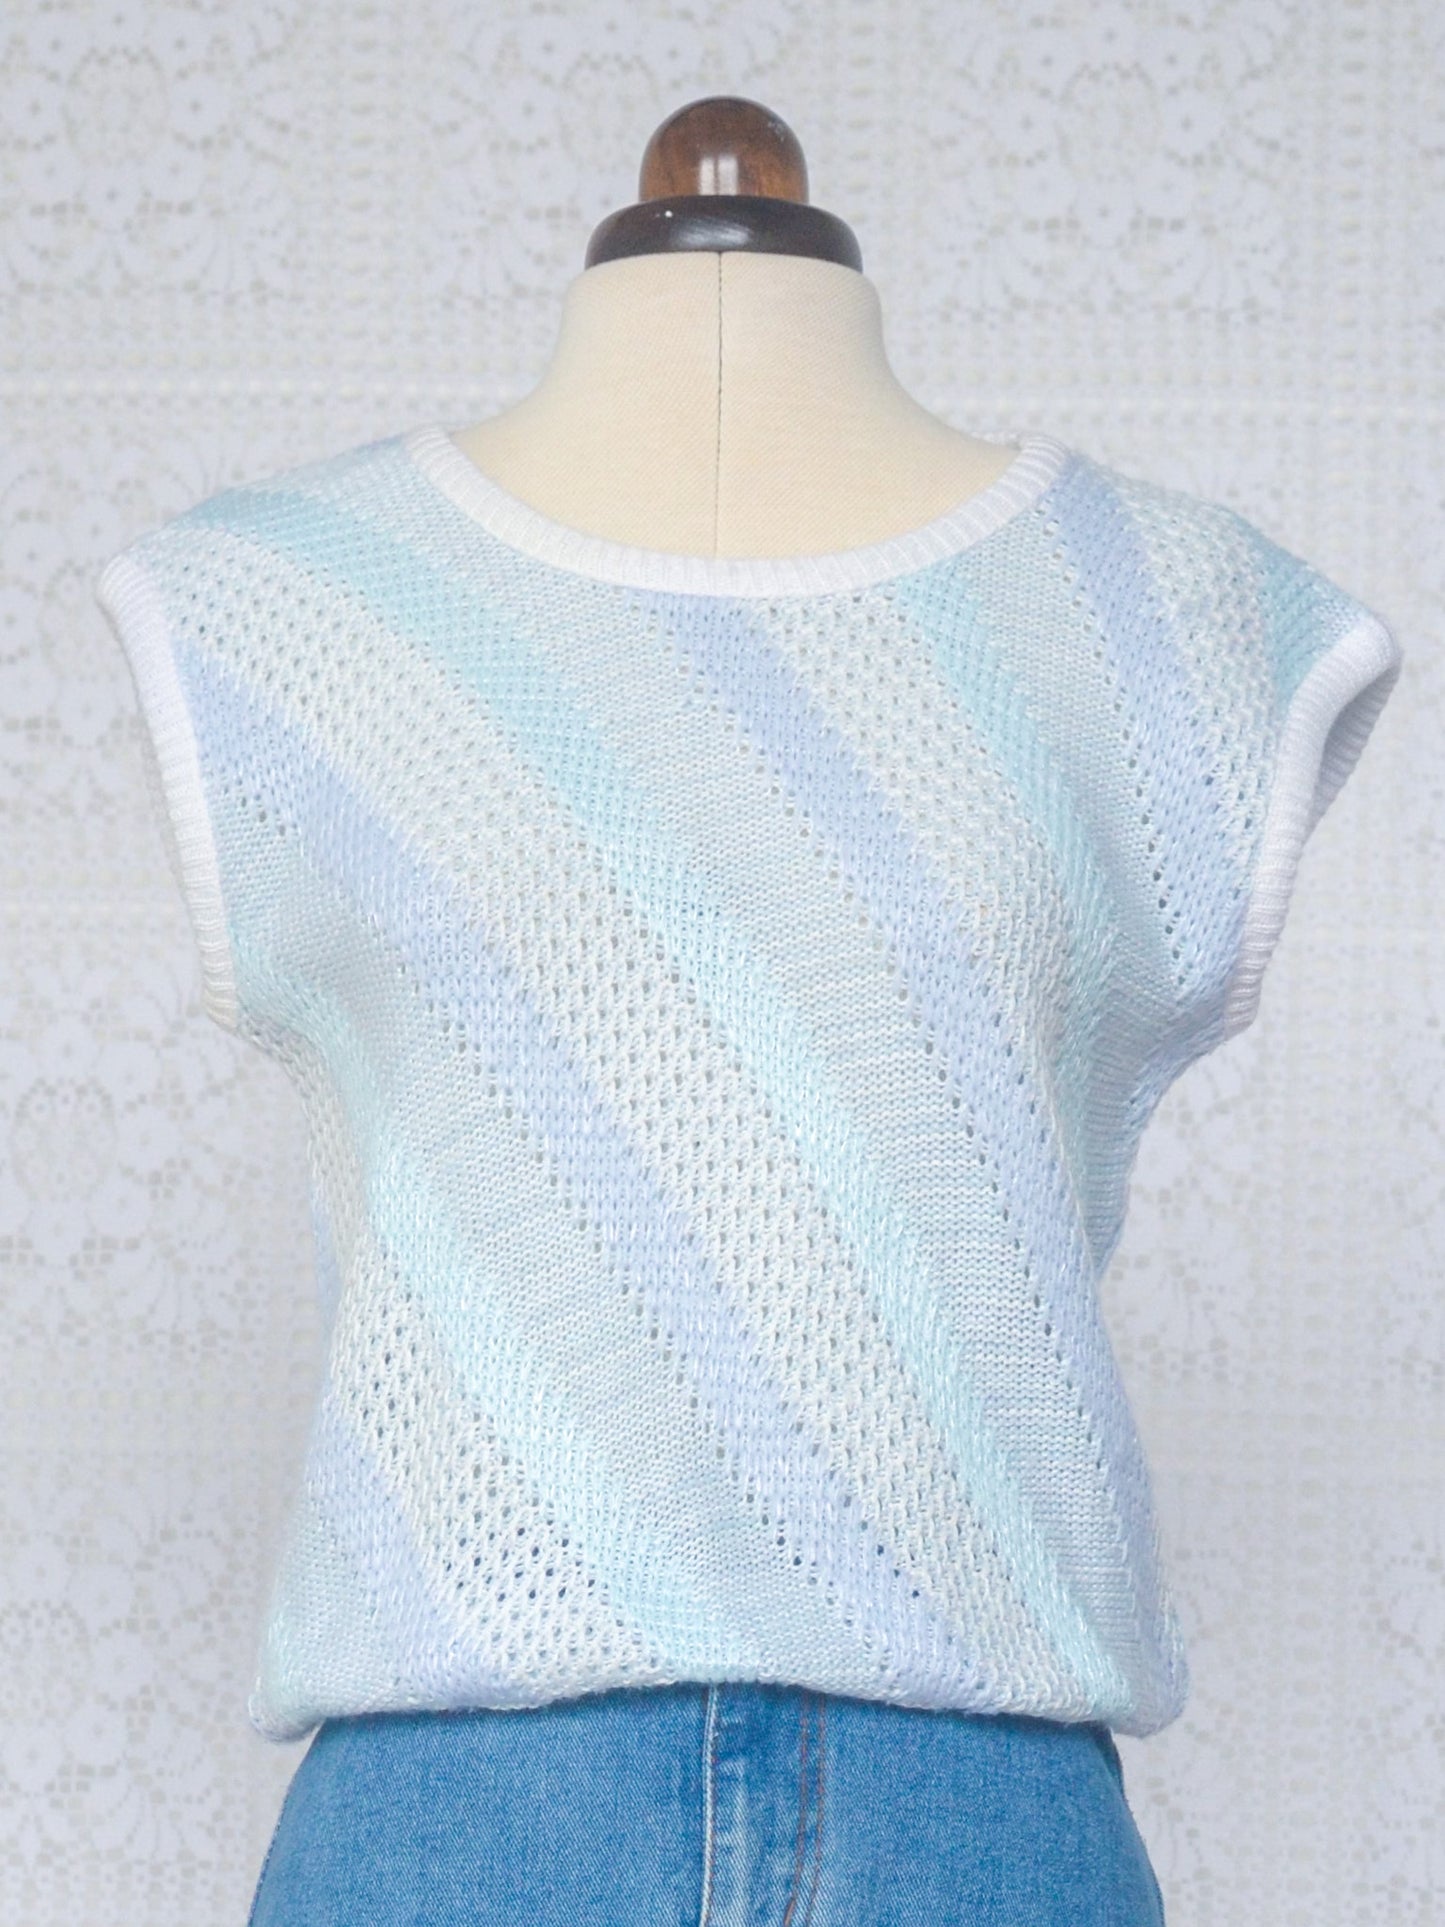 1980s style pale blue and white diagonal stripe cropped sleeveless jumper